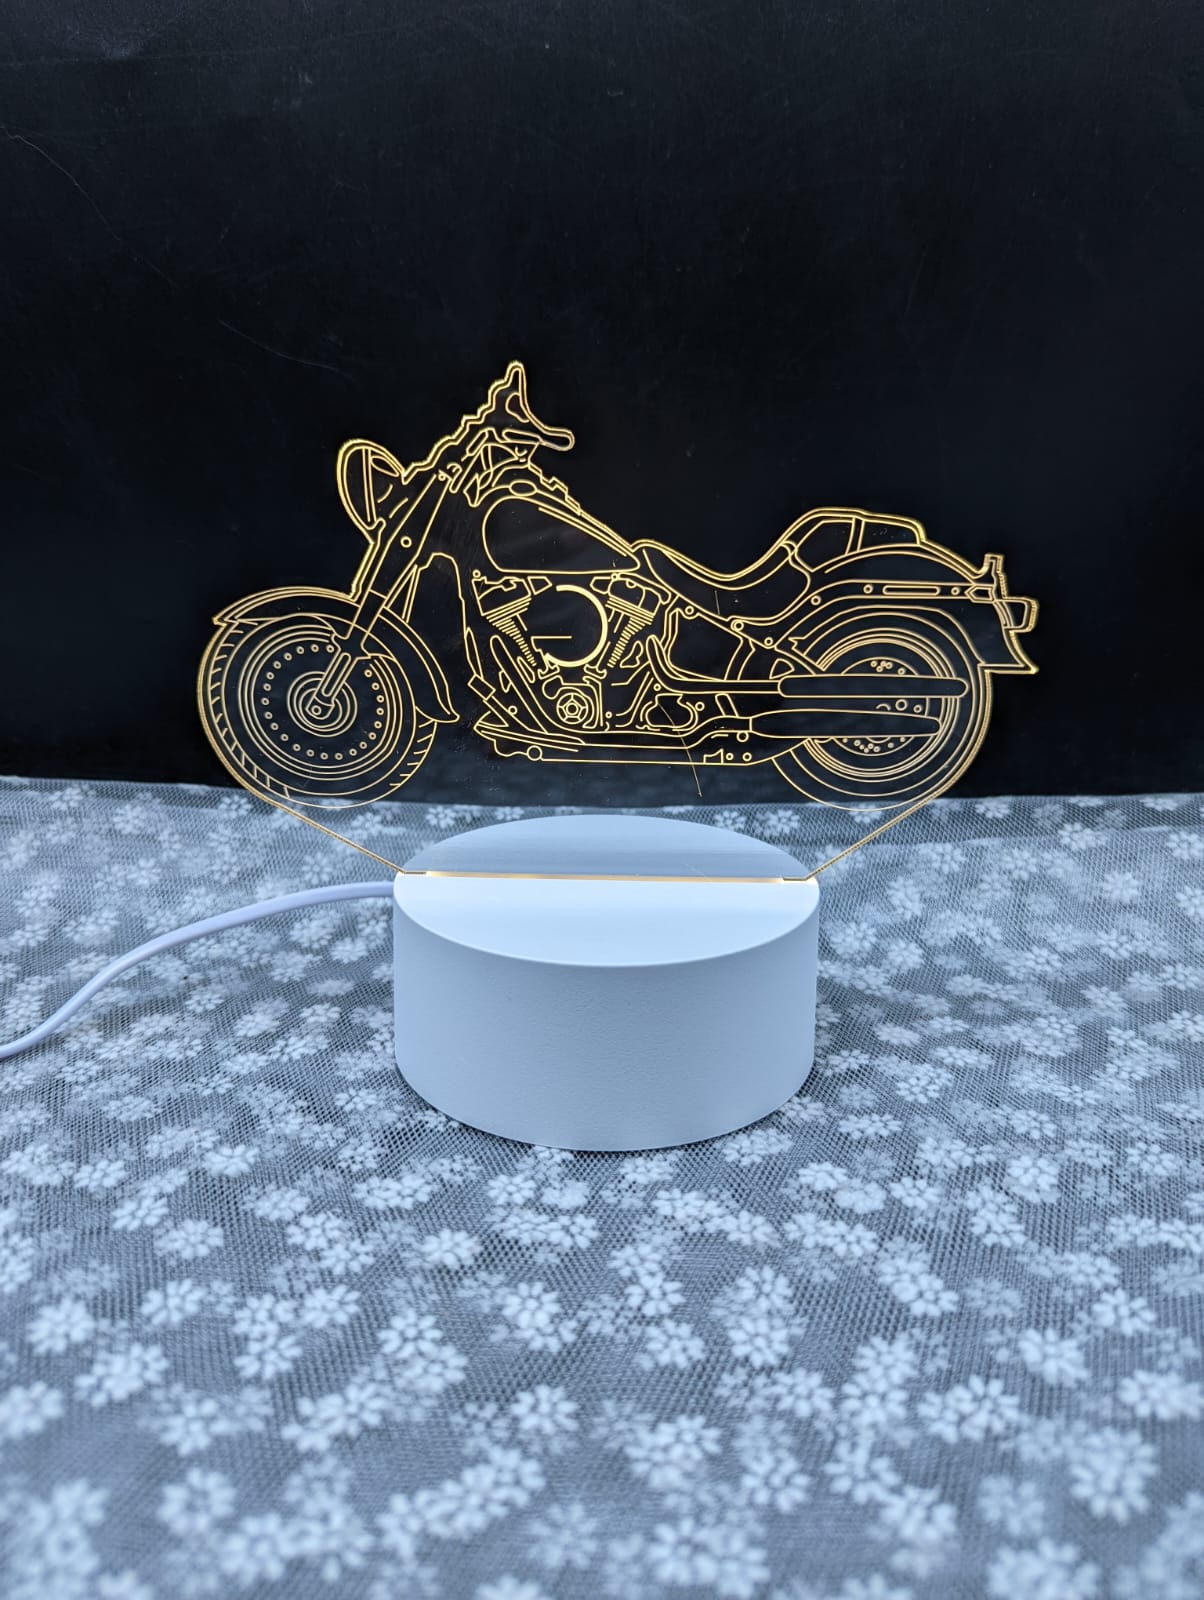 Motorcycle 3d Led Illusion Lamp